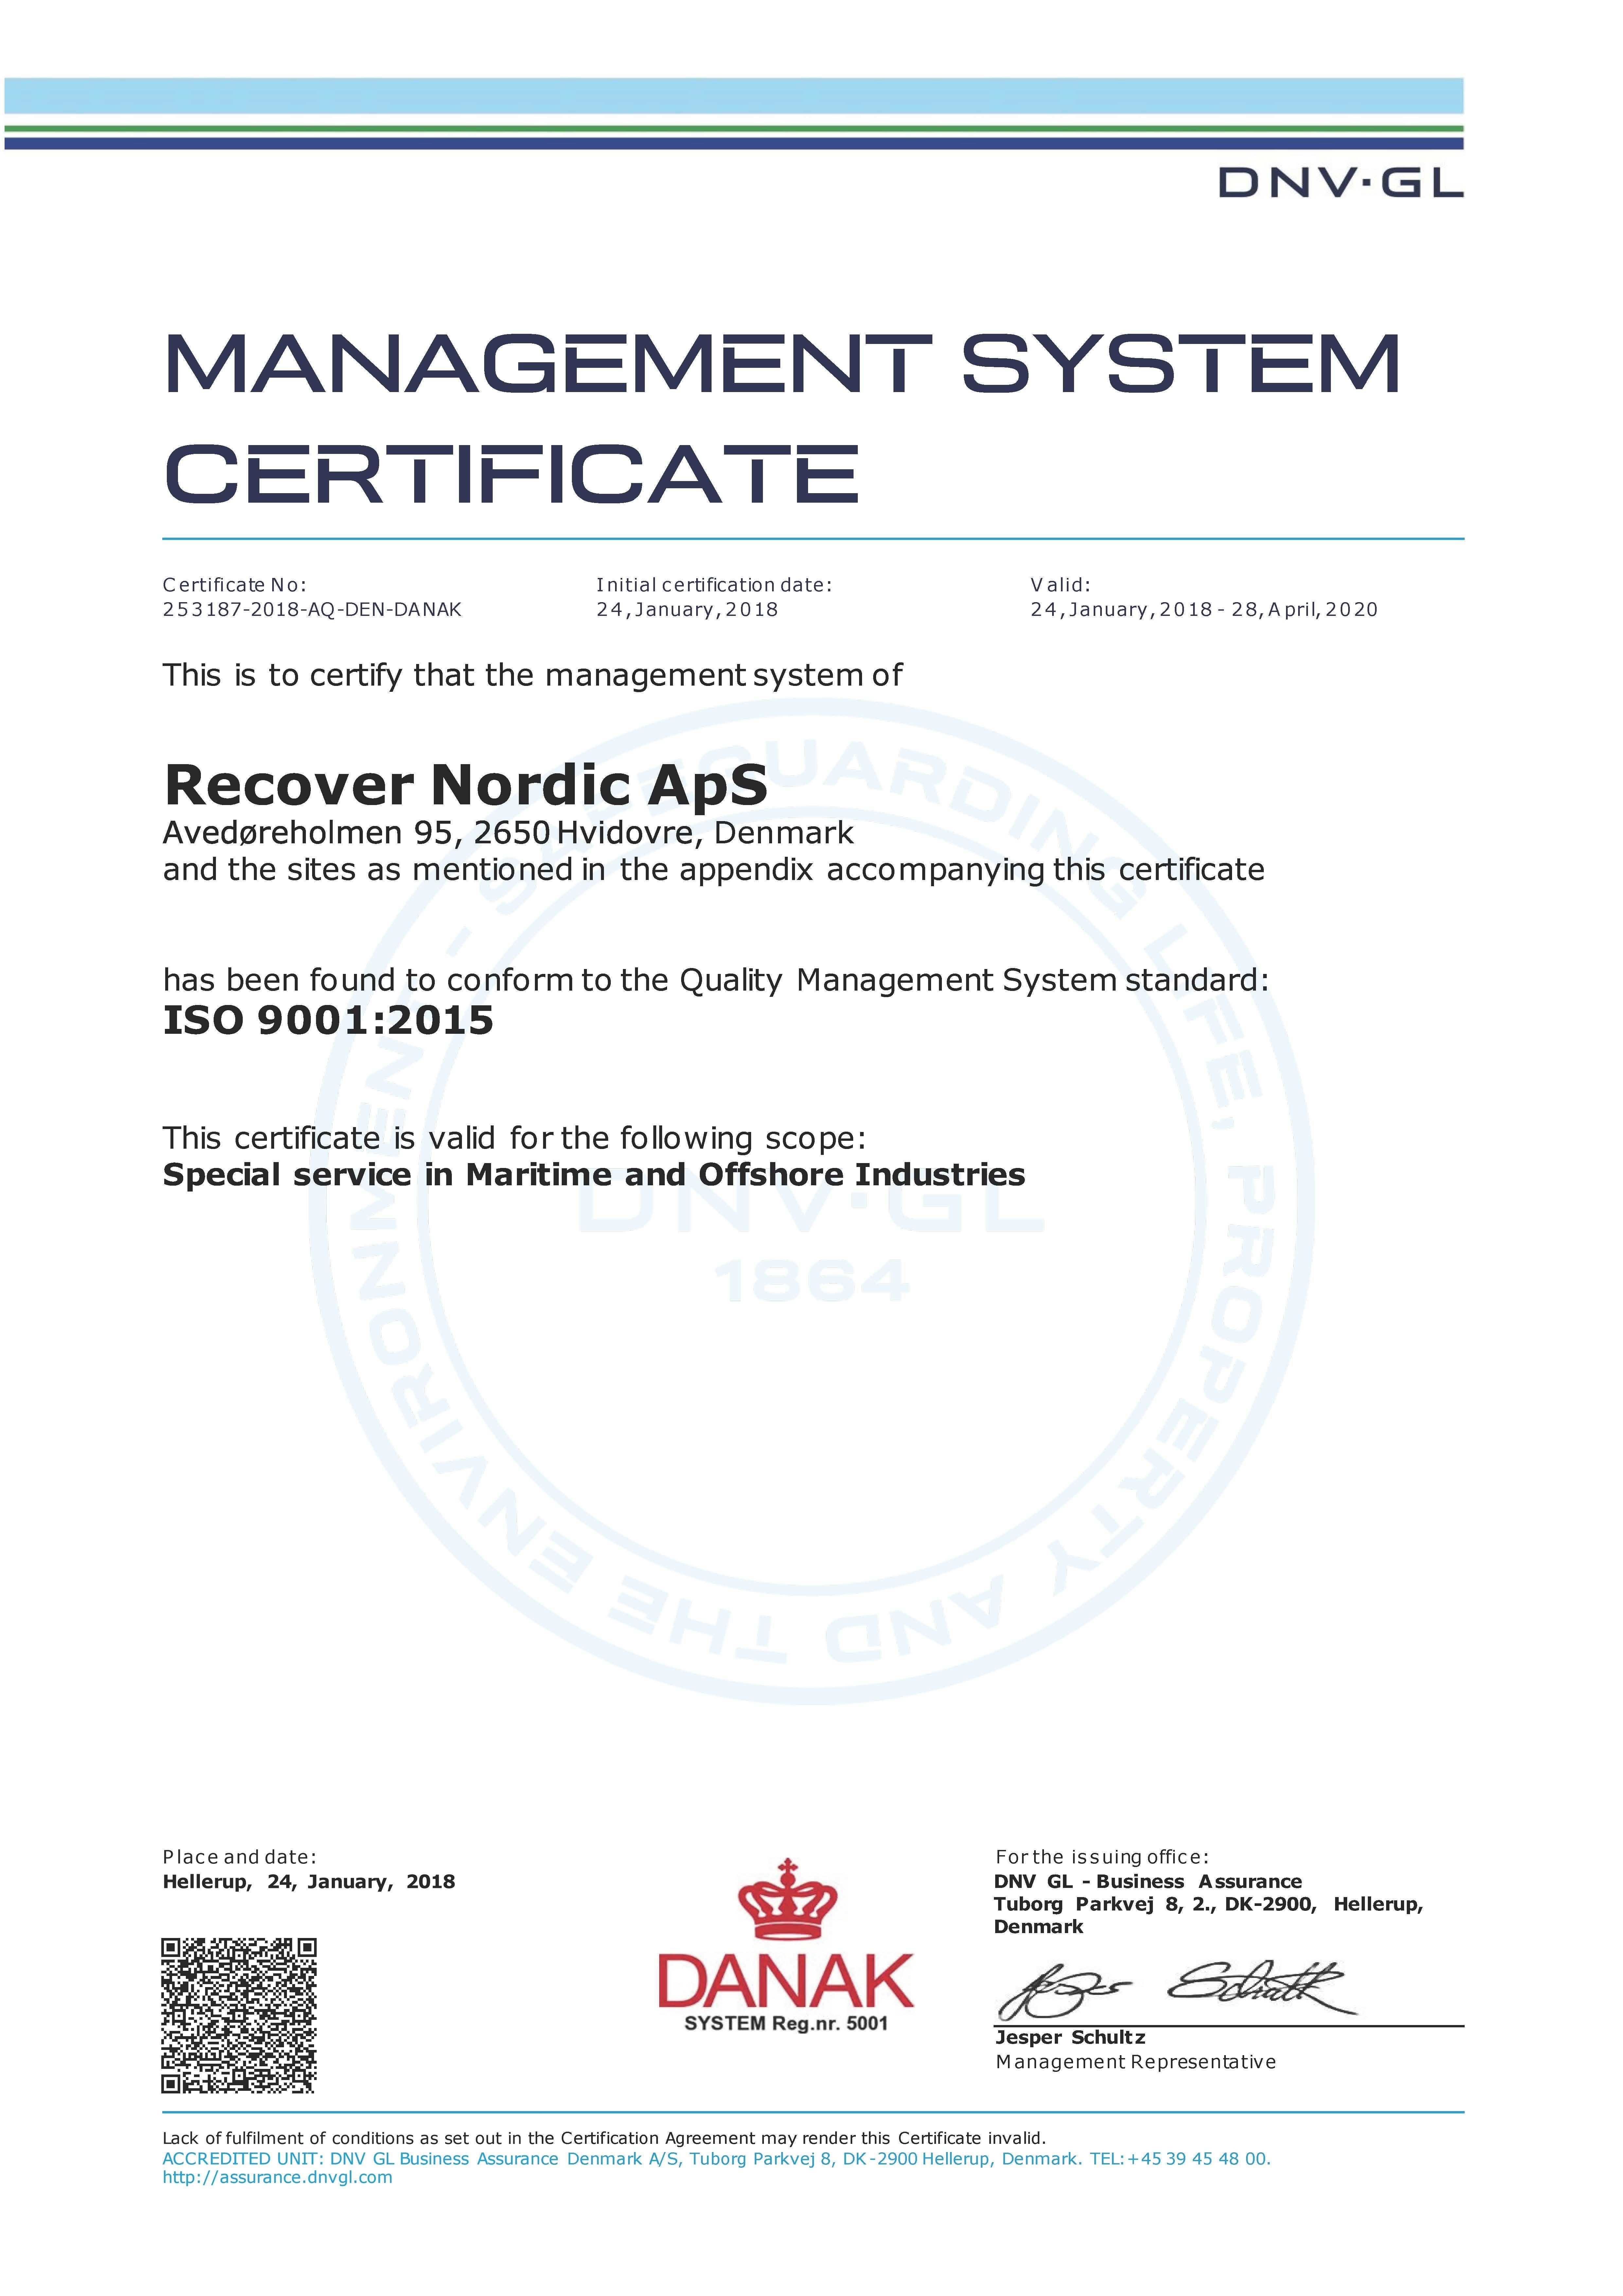 Recover Nordic ApS has received